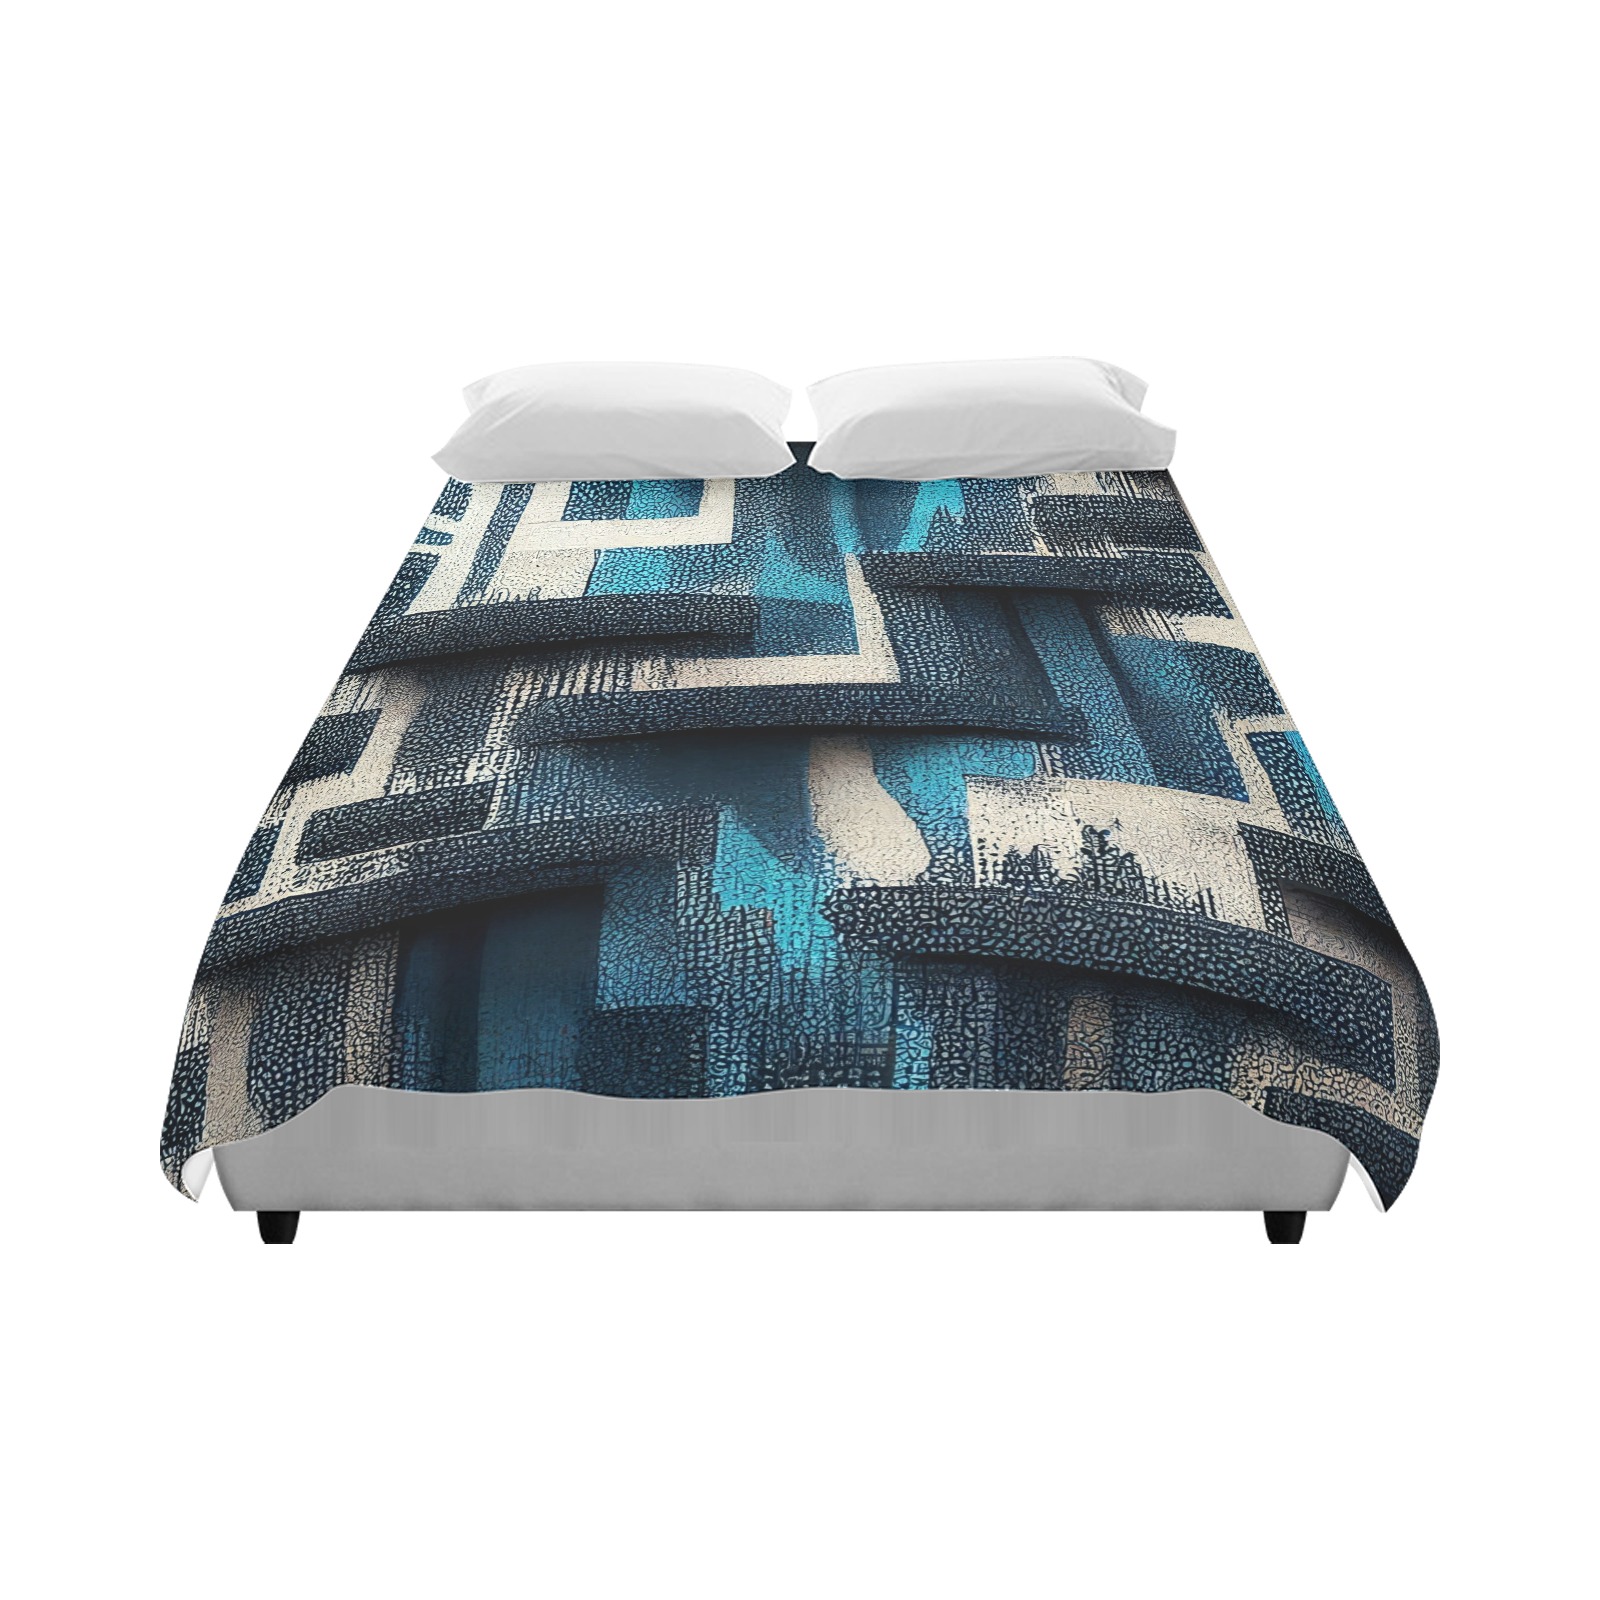 blue, white and black abstract pattern Duvet Cover 86"x70" ( All-over-print)